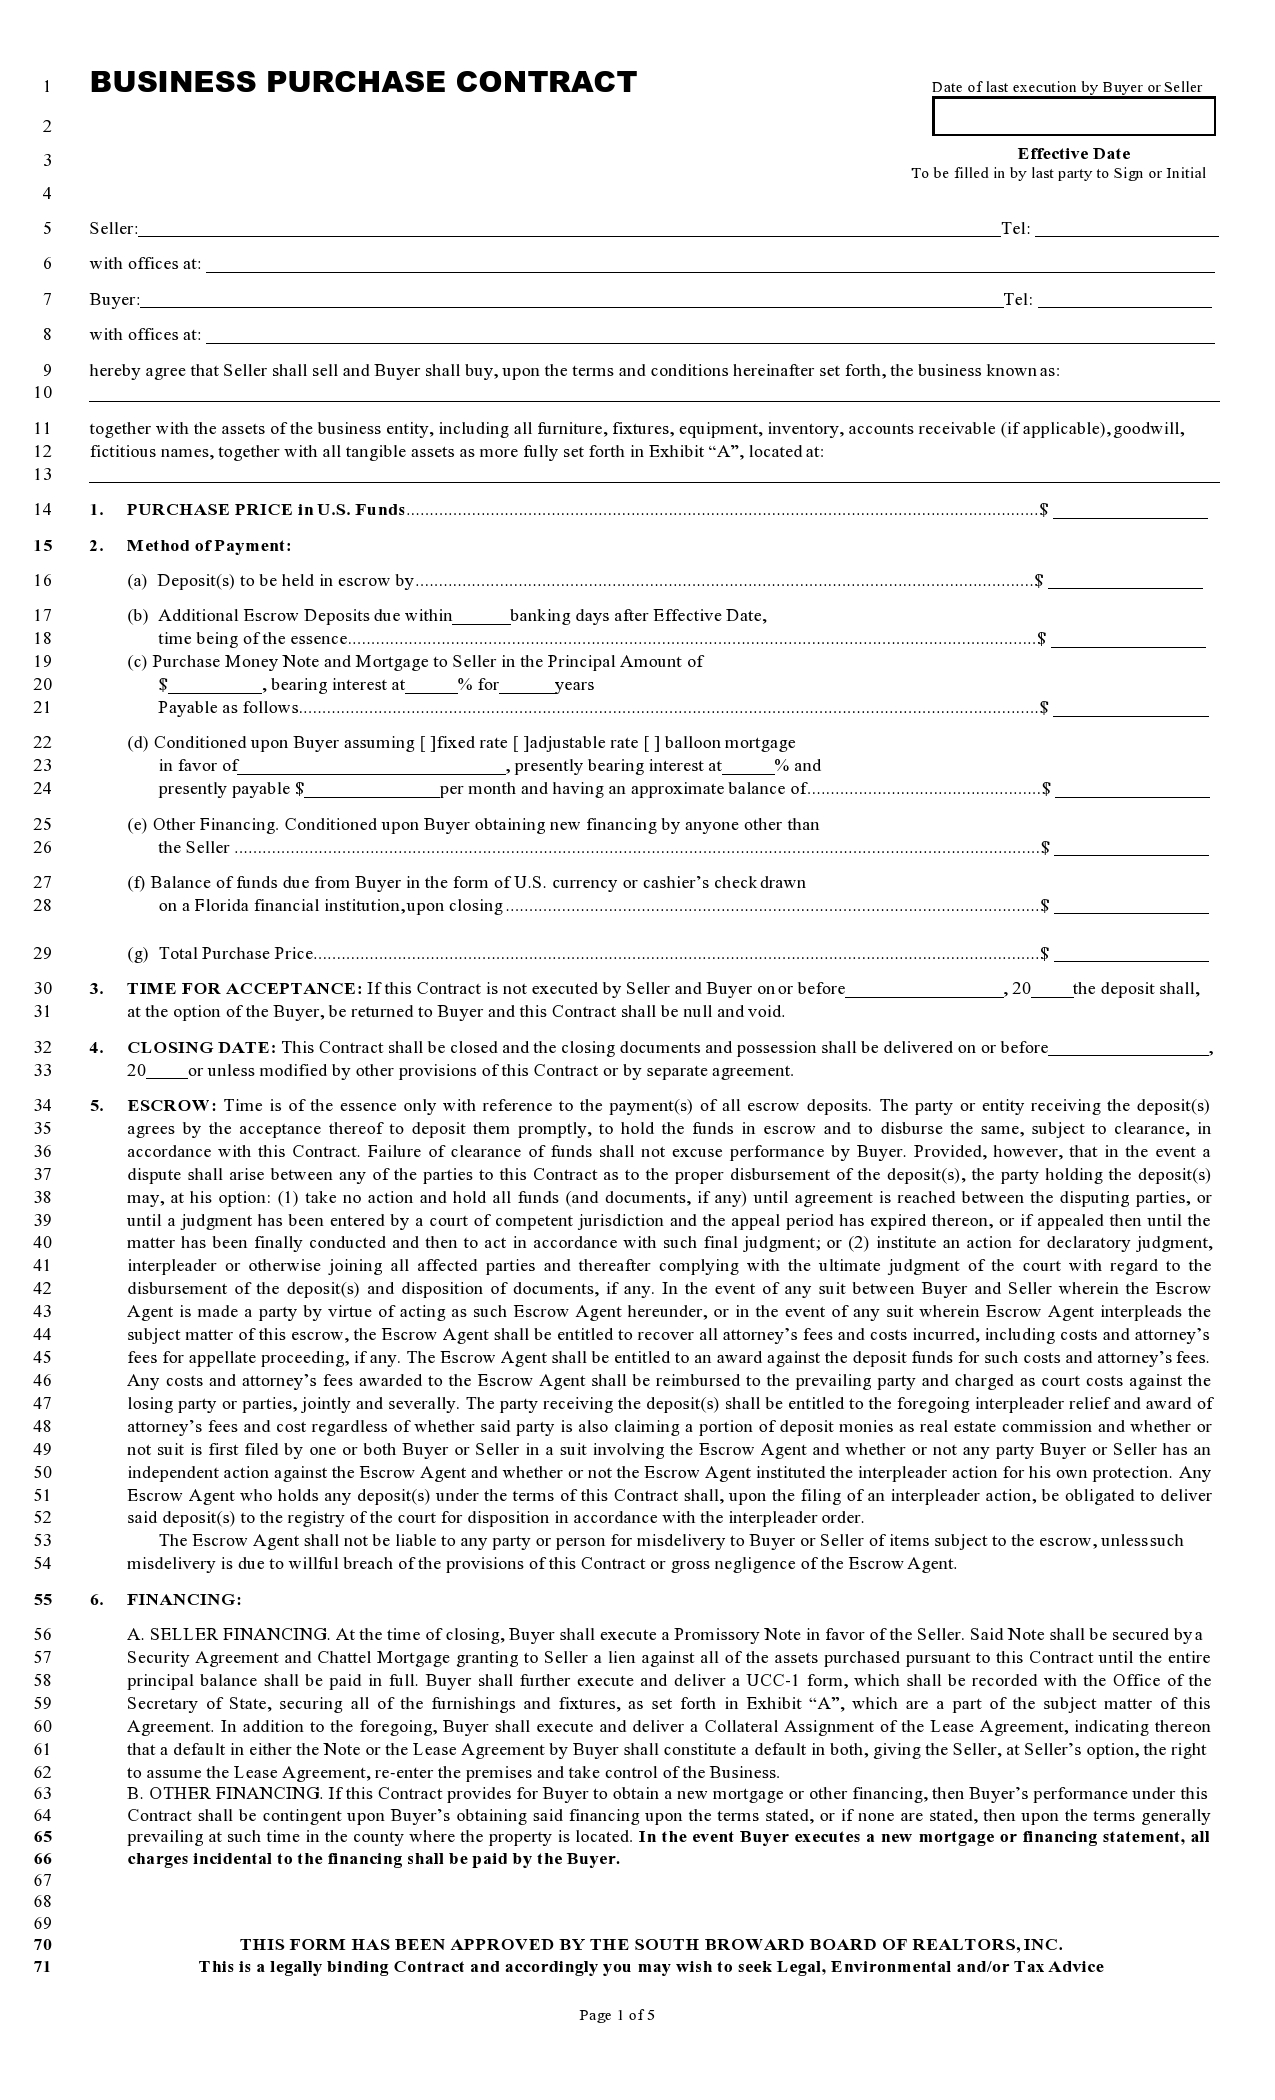 Free business purchase agreement 28